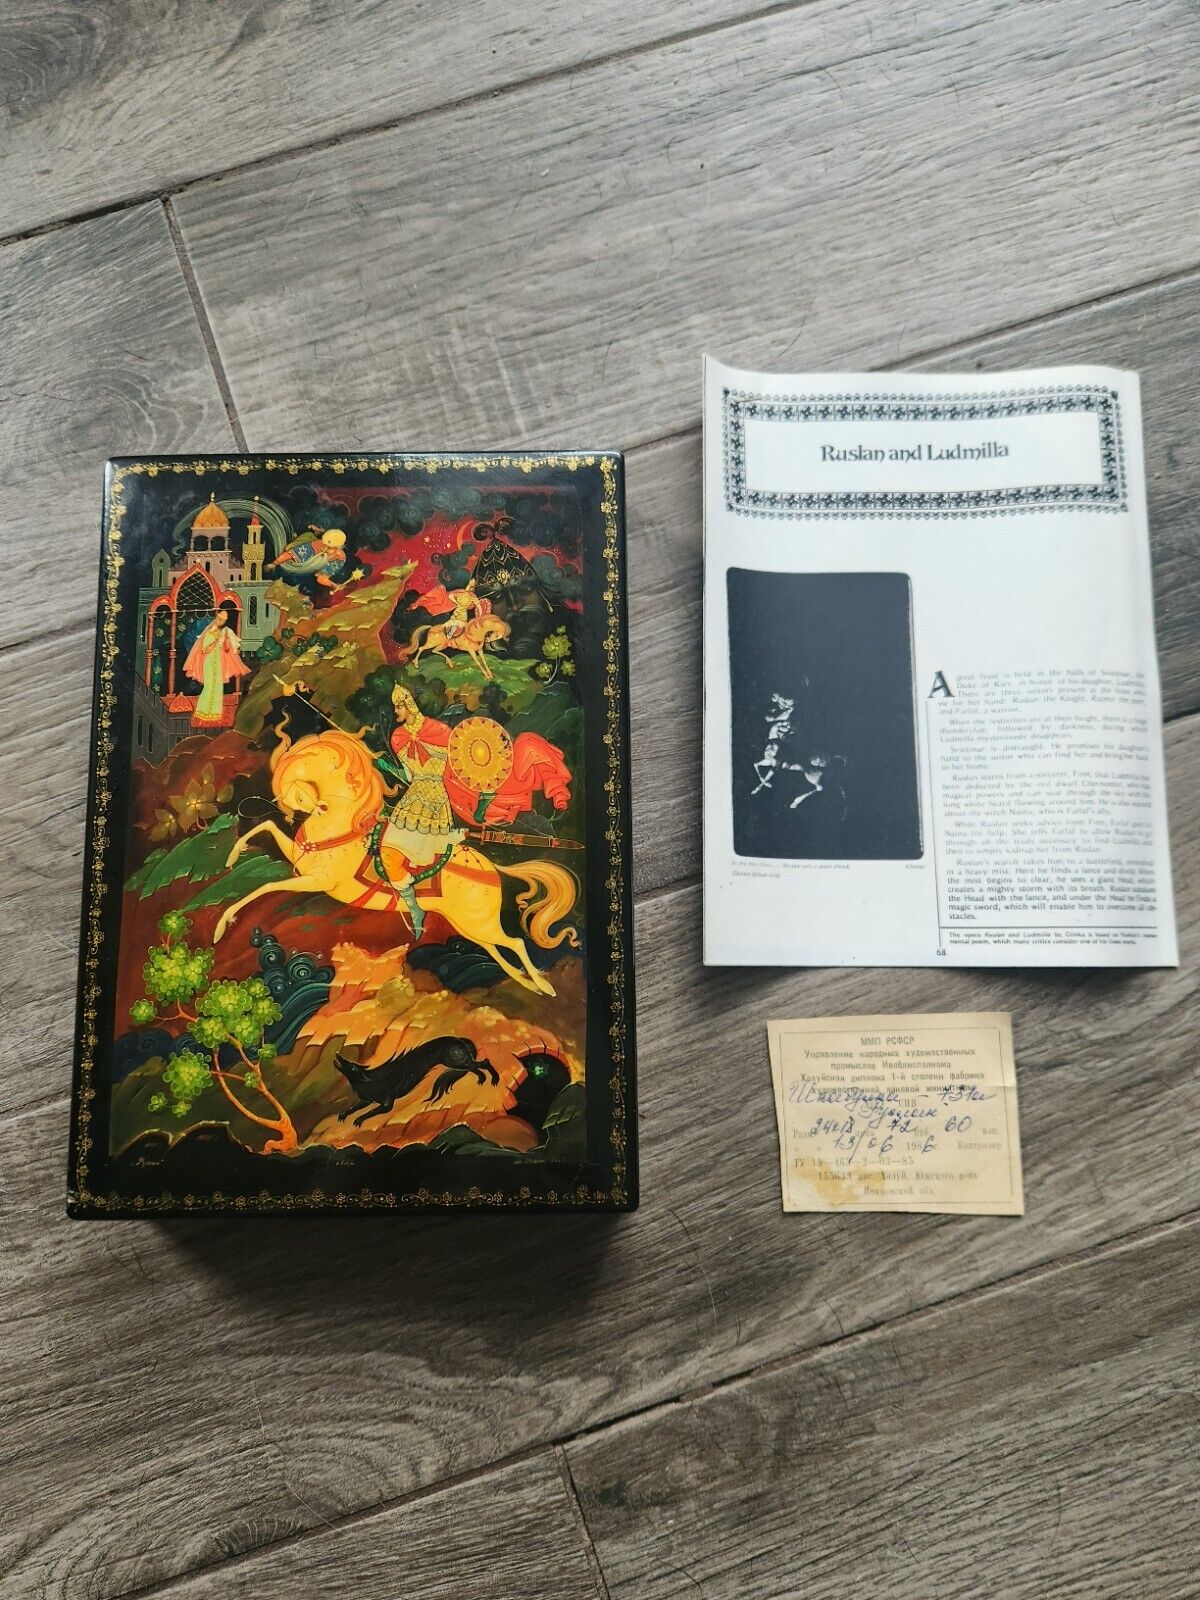 Russian Lacquer Artist Retired In 1970’s-USSR With Papers And Certificate